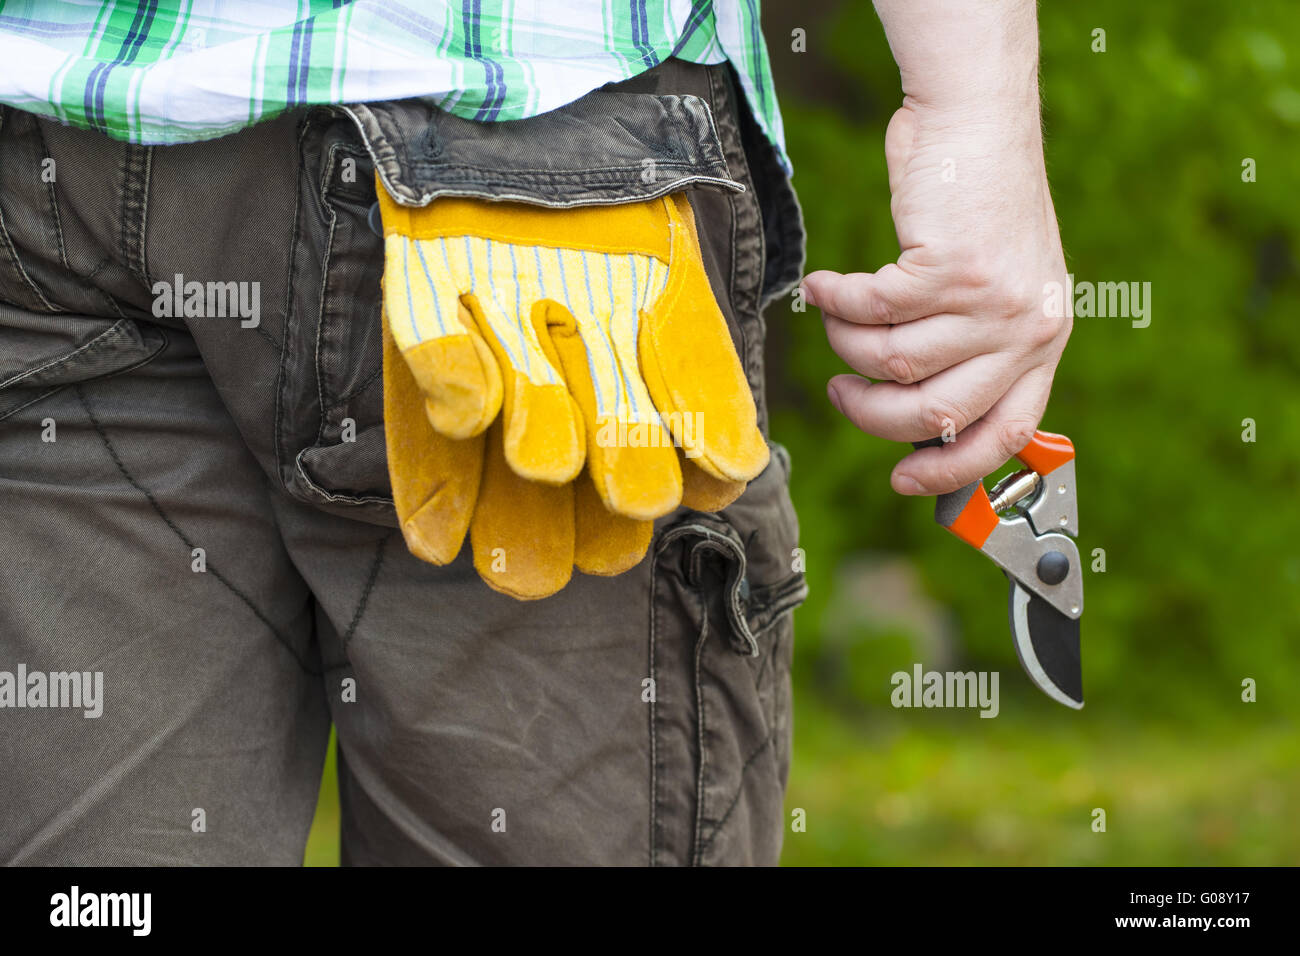 Man with gardening shears in hand Stock Photo